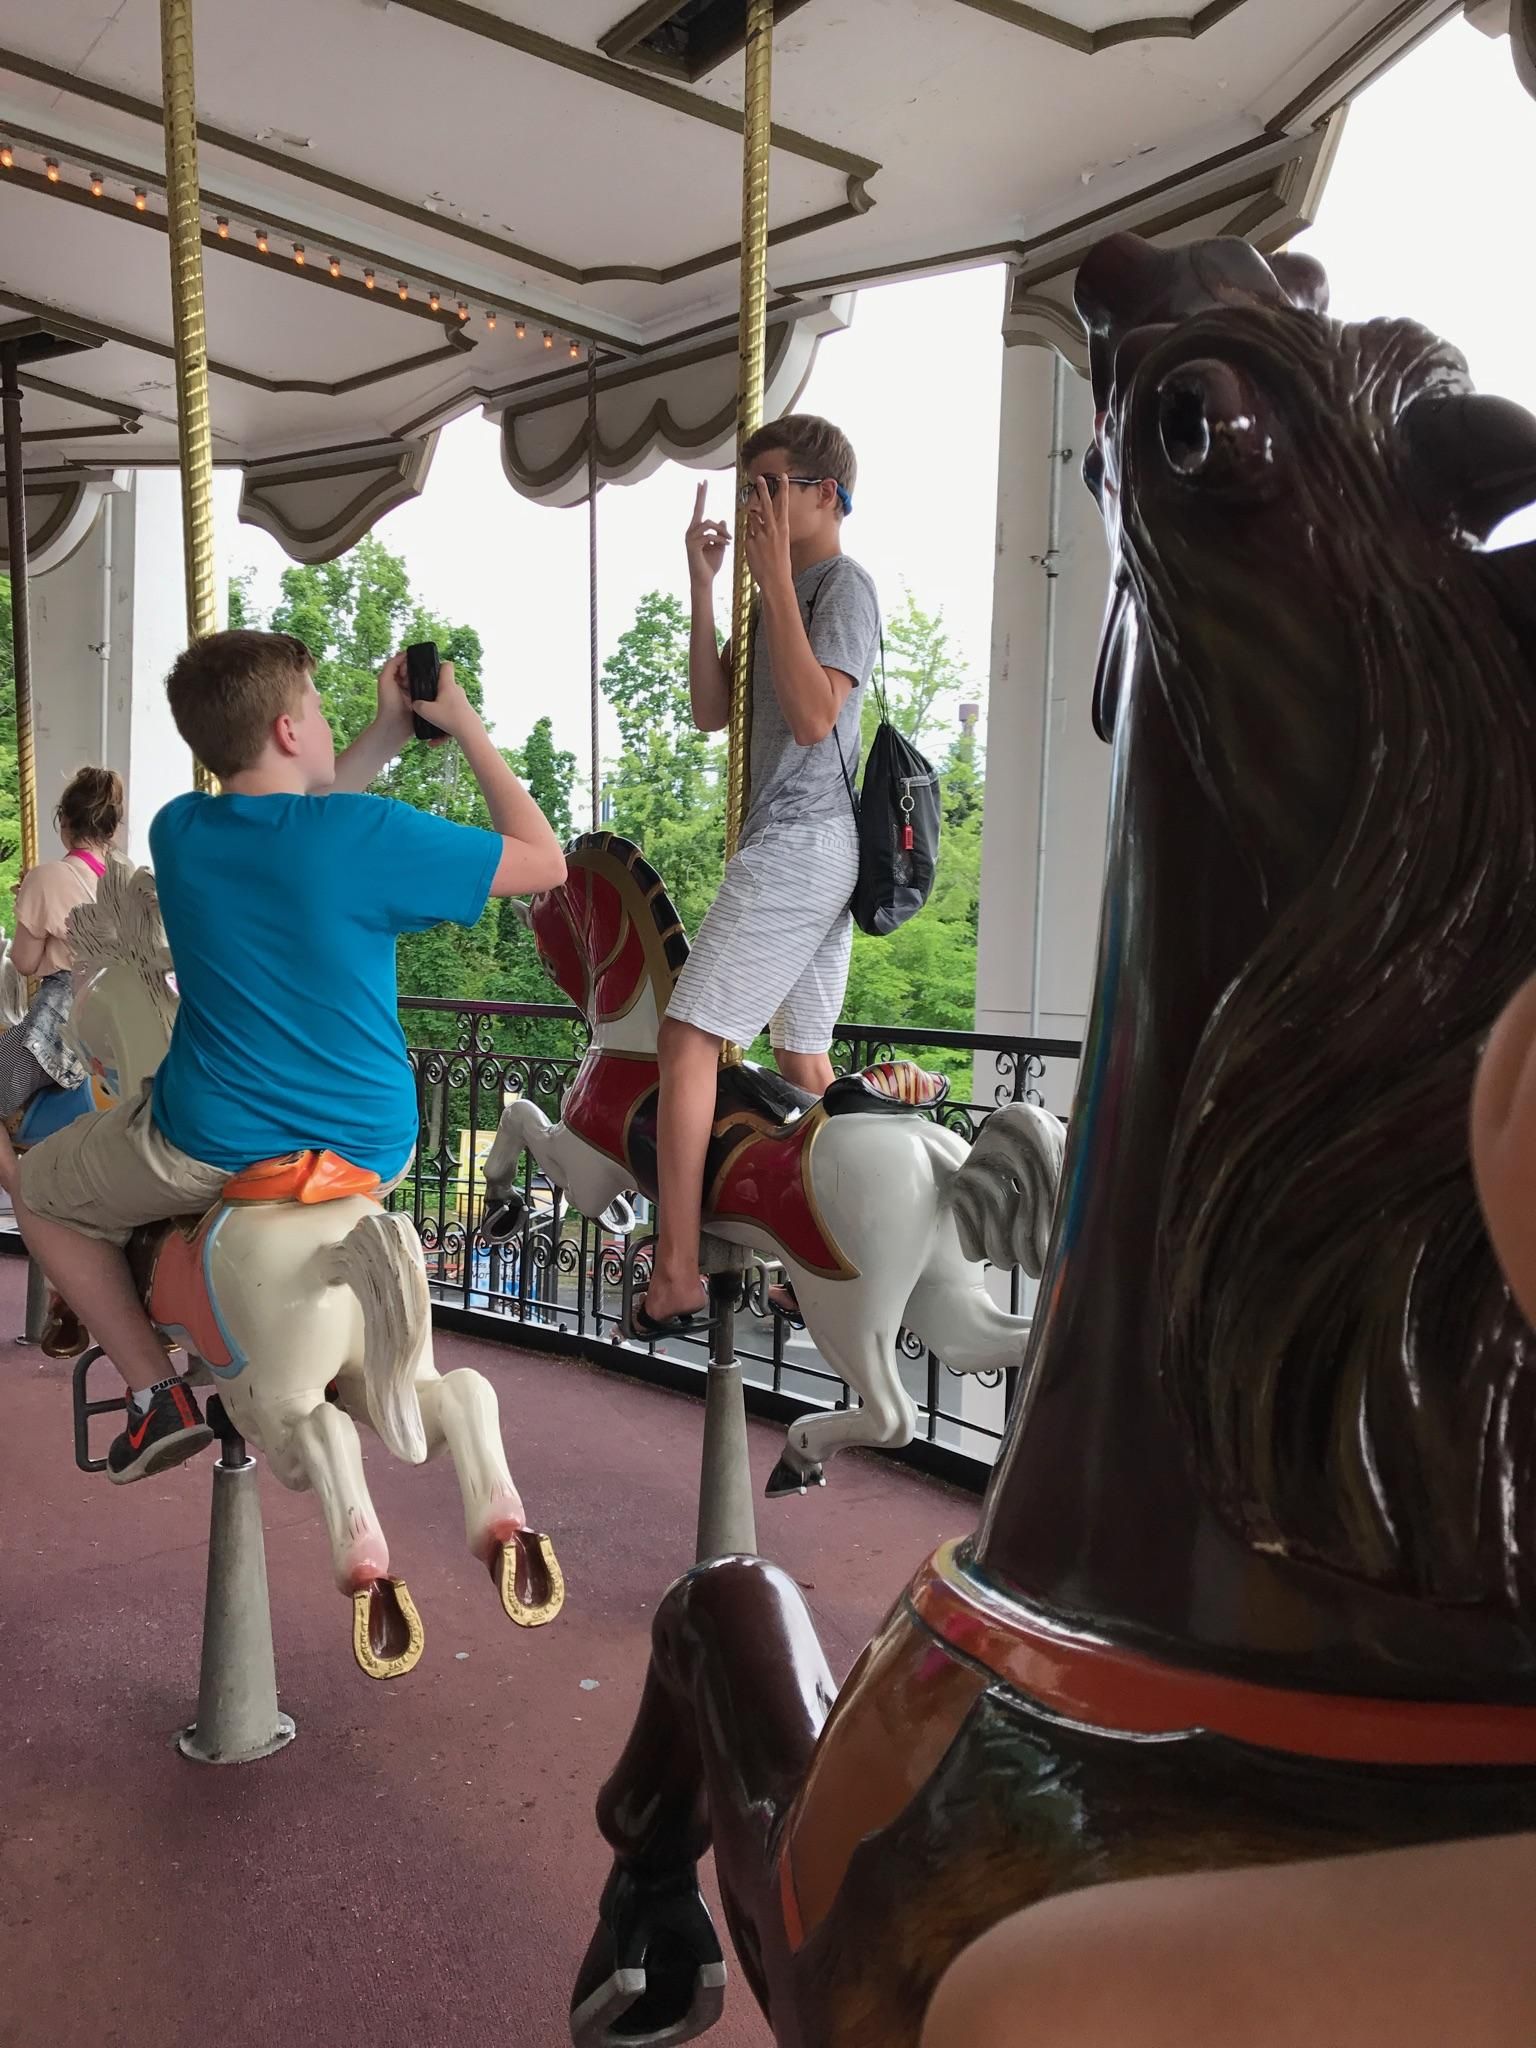 You may be cool, but you will never be Carousel Gangster cool